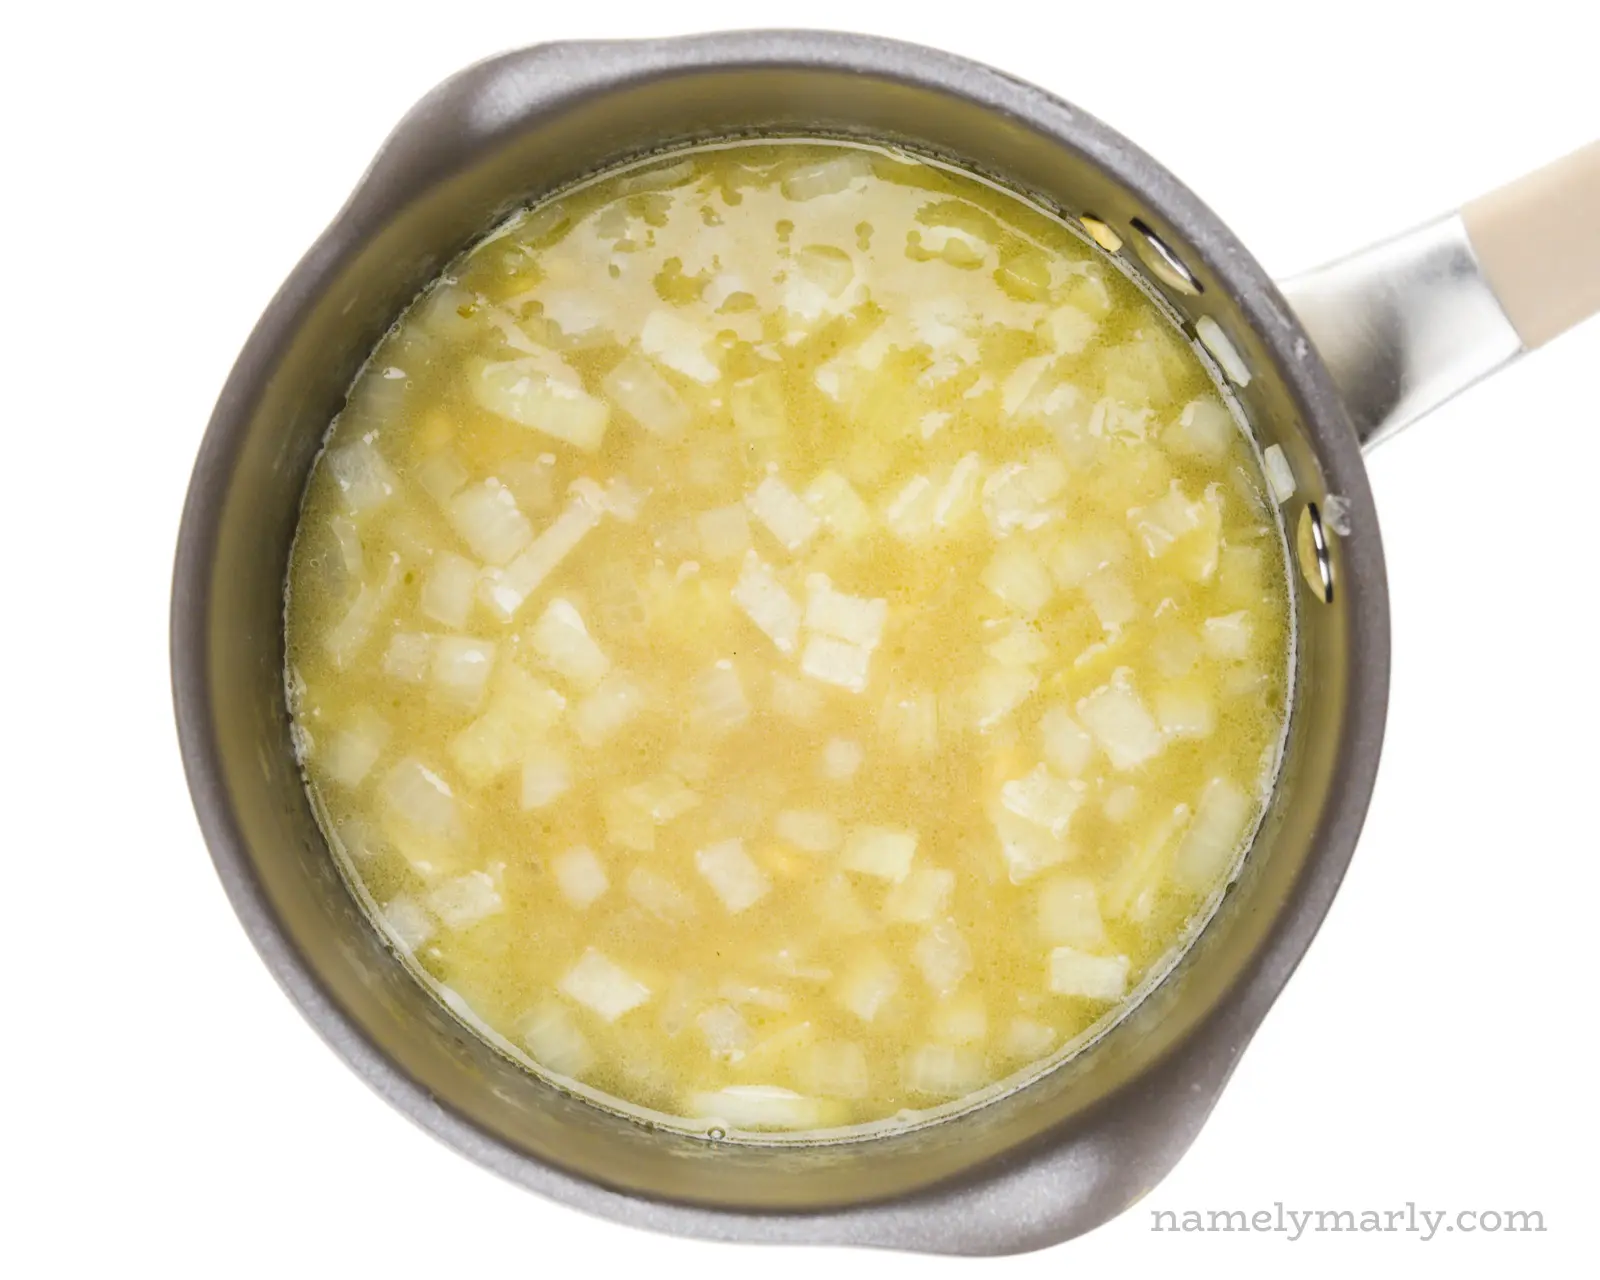 A saucepan is full of onions, broth, and other ingredients to make alfredo sauce.